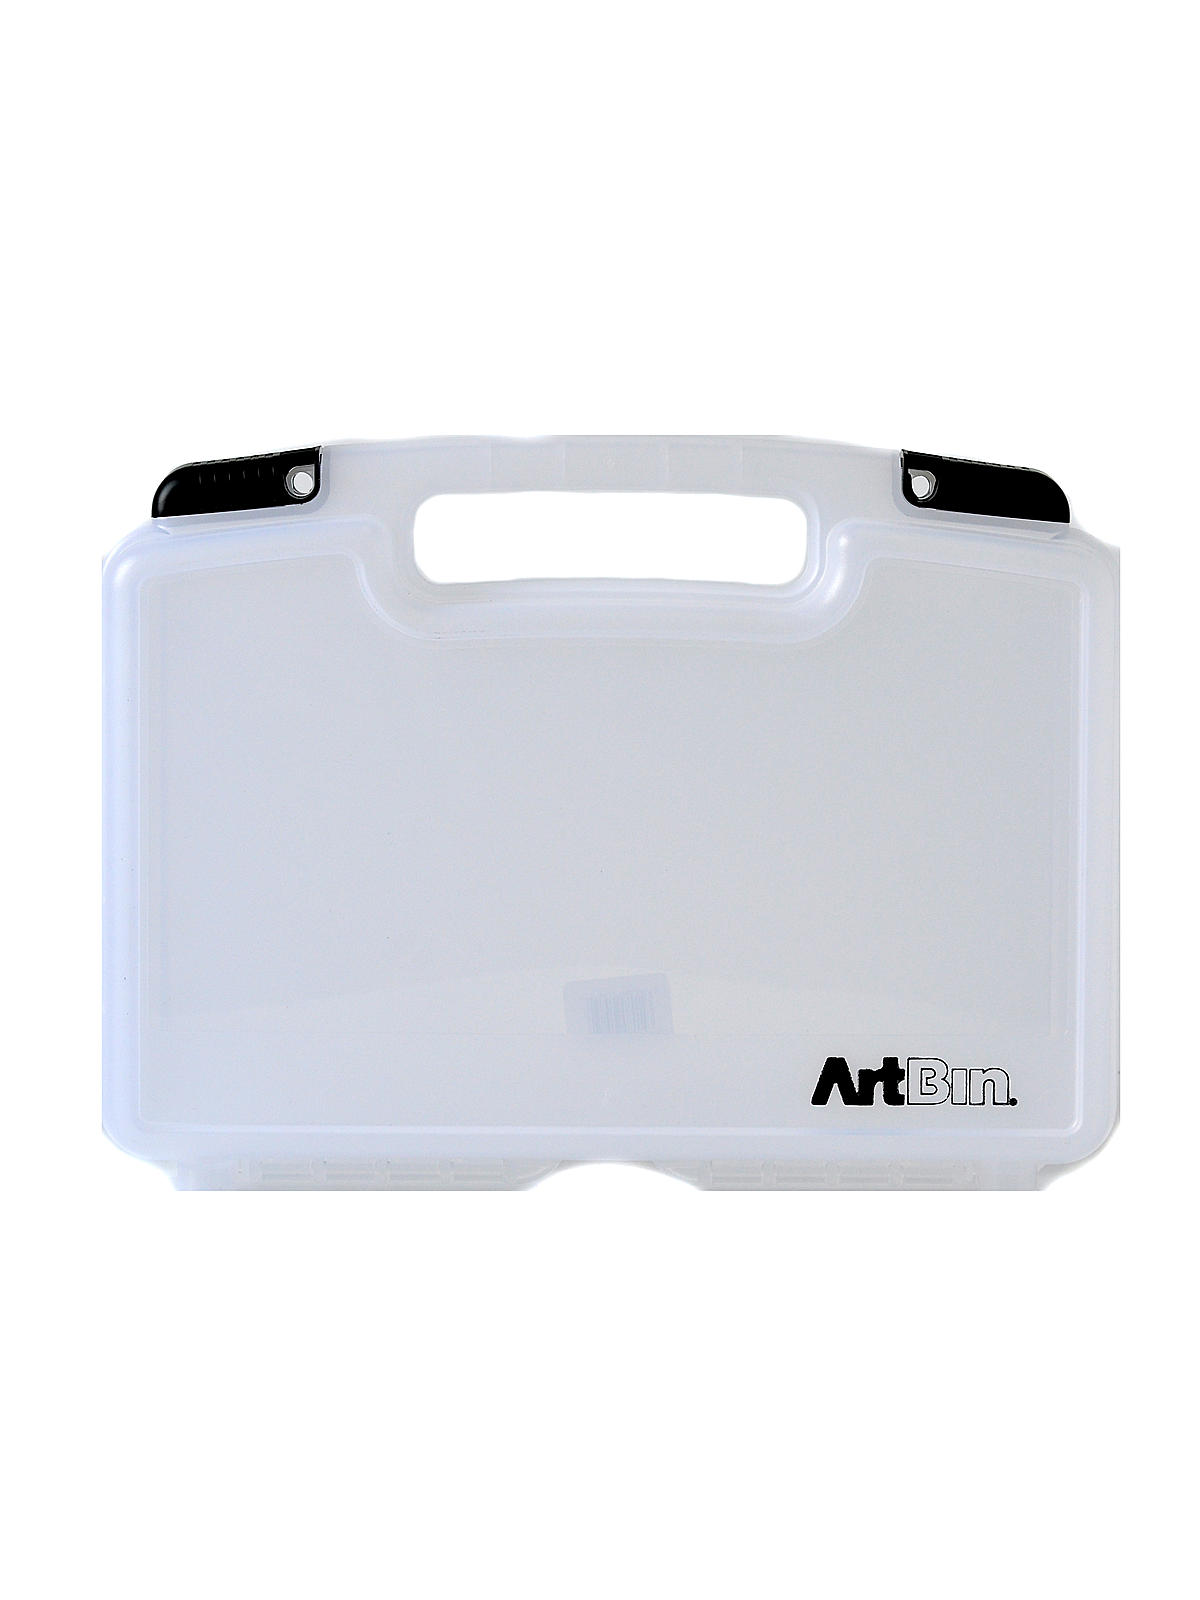 ArtBin - Quick View Carrying Cases